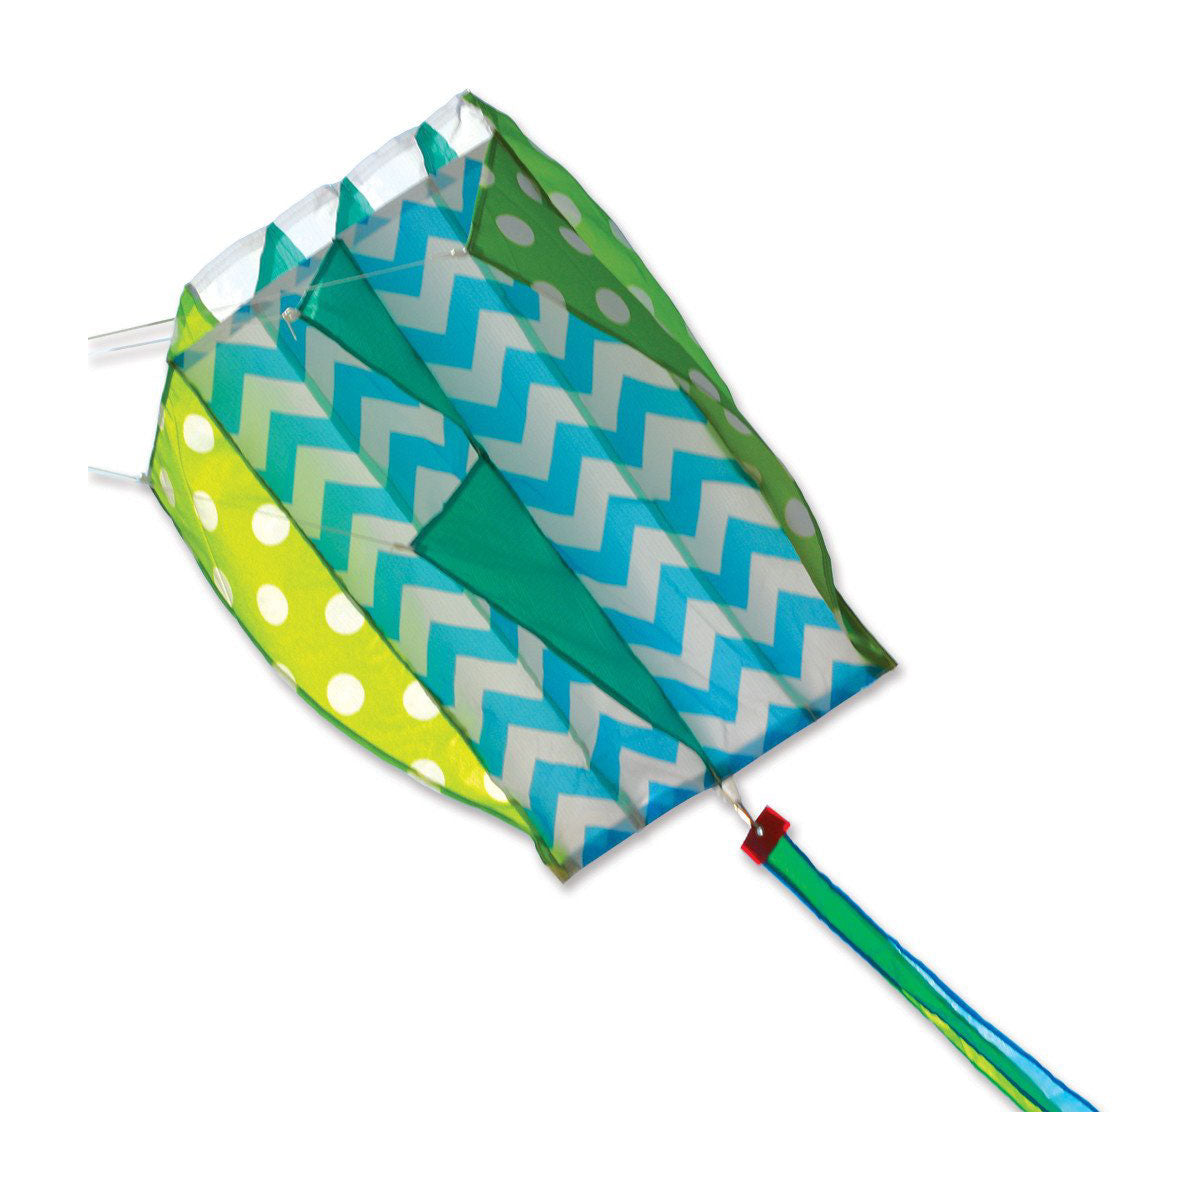  Quirky Cool Colors Parafoil 2 Kite from Premier Kites